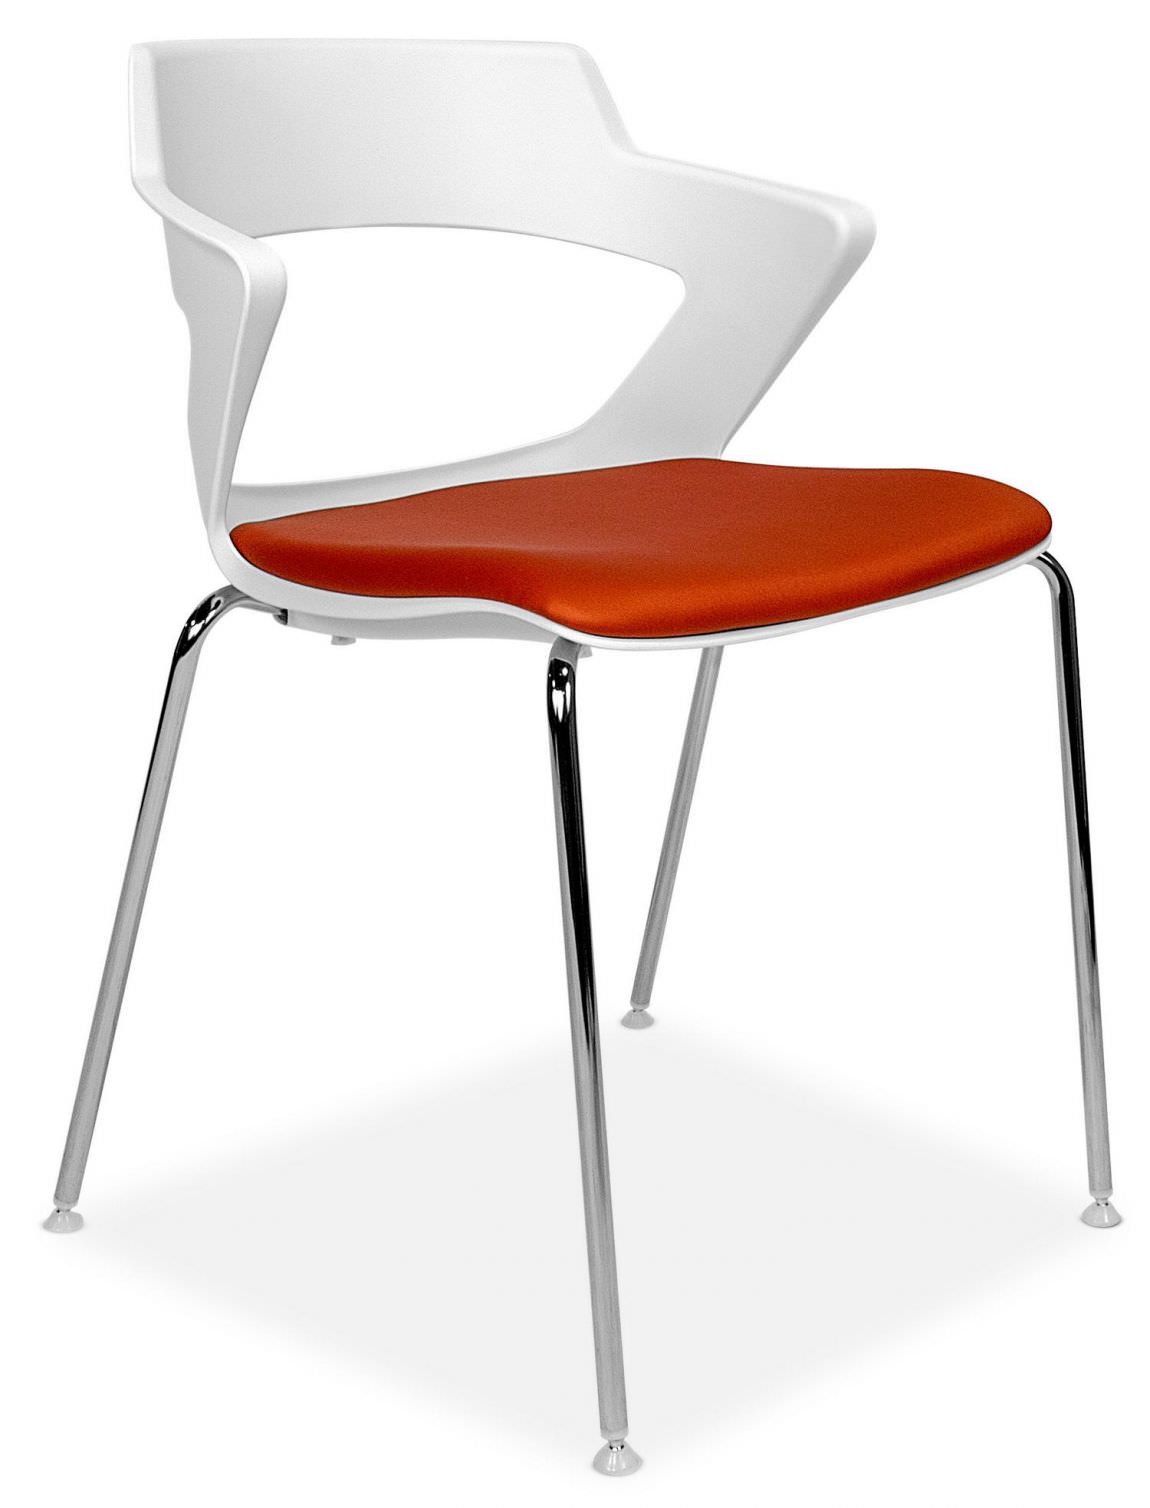 White Stacking Chair with Padded Seat